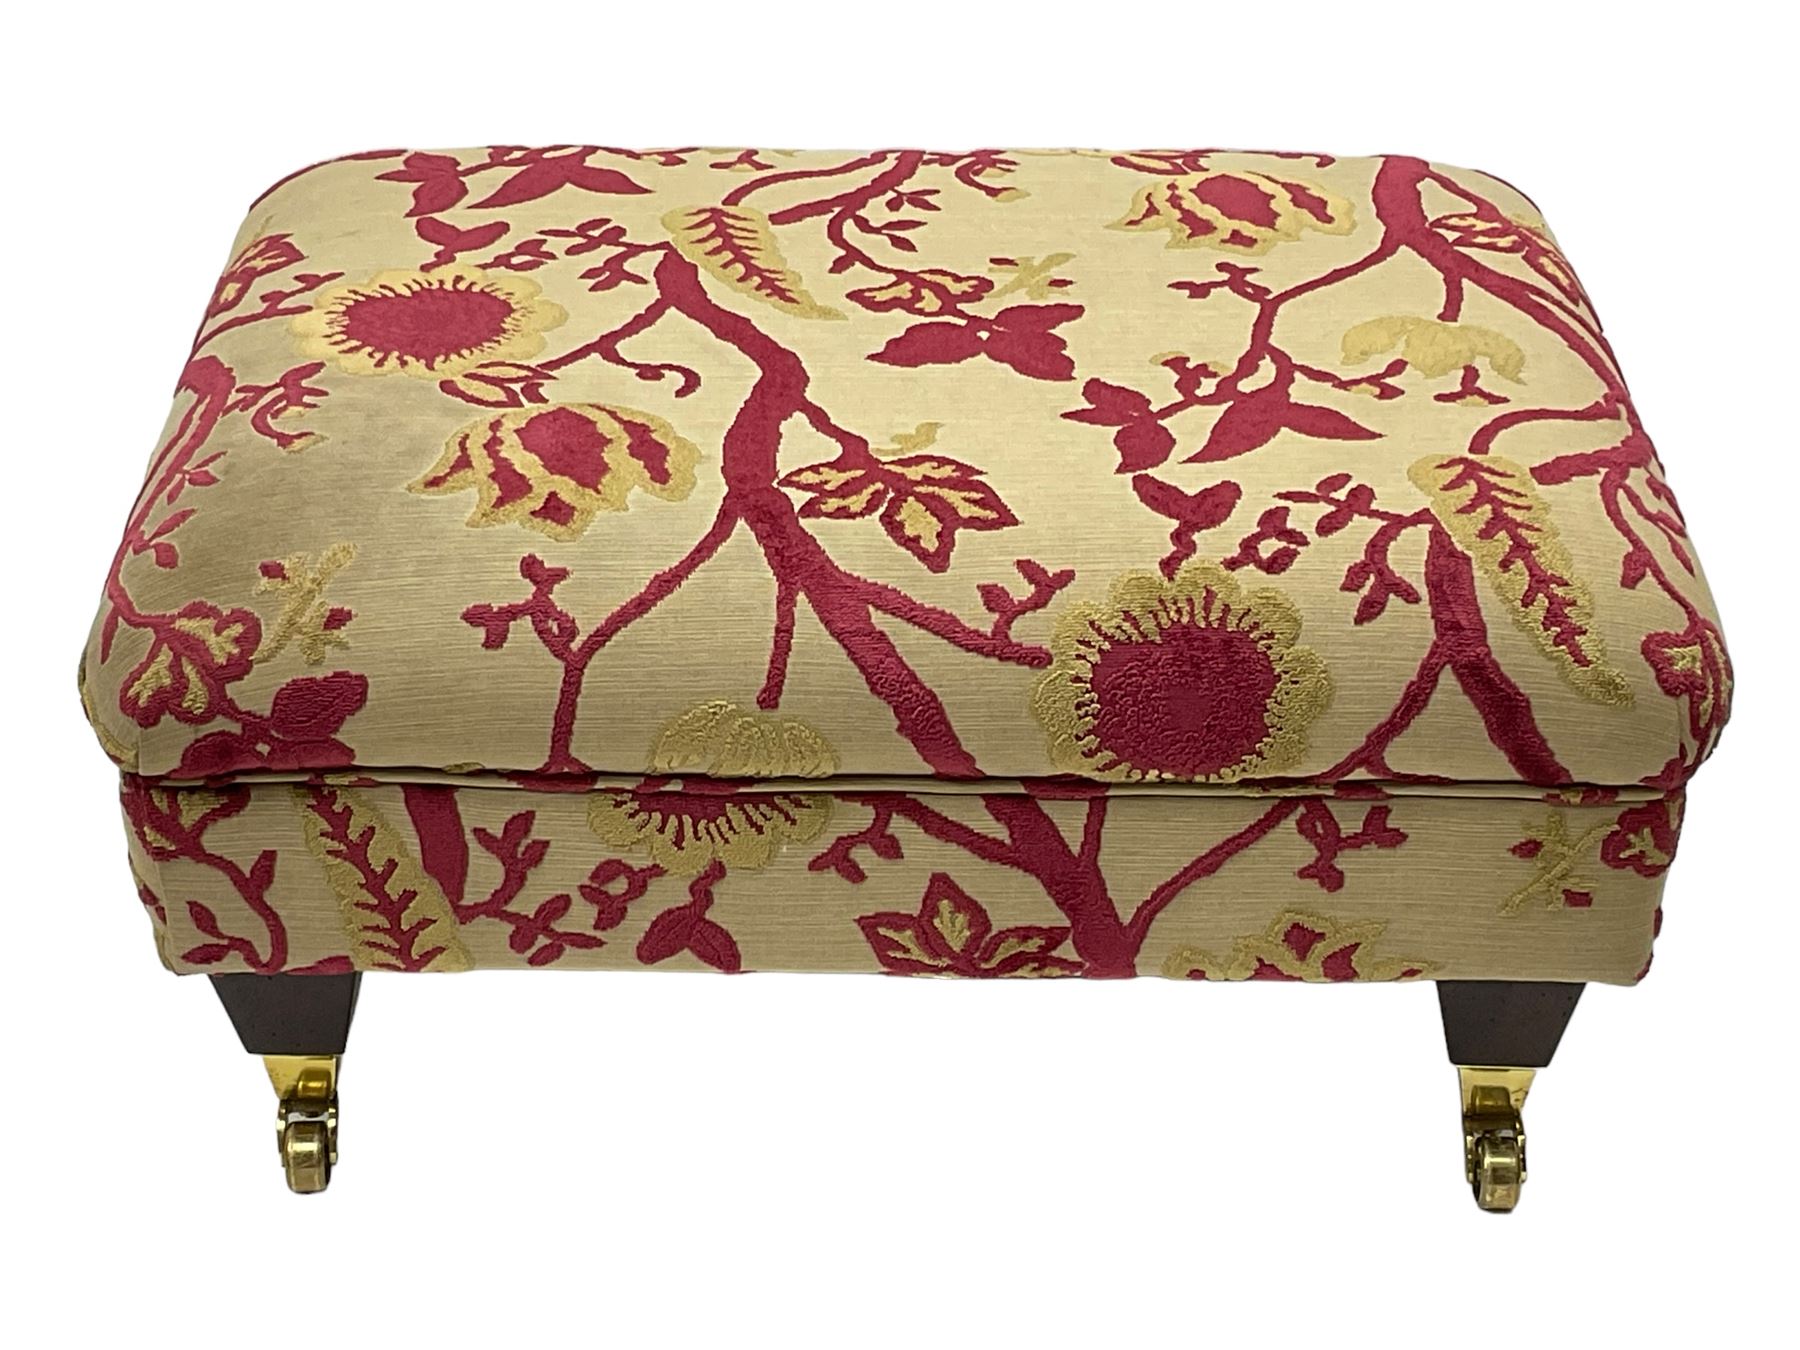 Three-piece lounge suite - large two-seat sofa upholstered in red and gold striped fabric (W185cm - Bild 11 aus 24